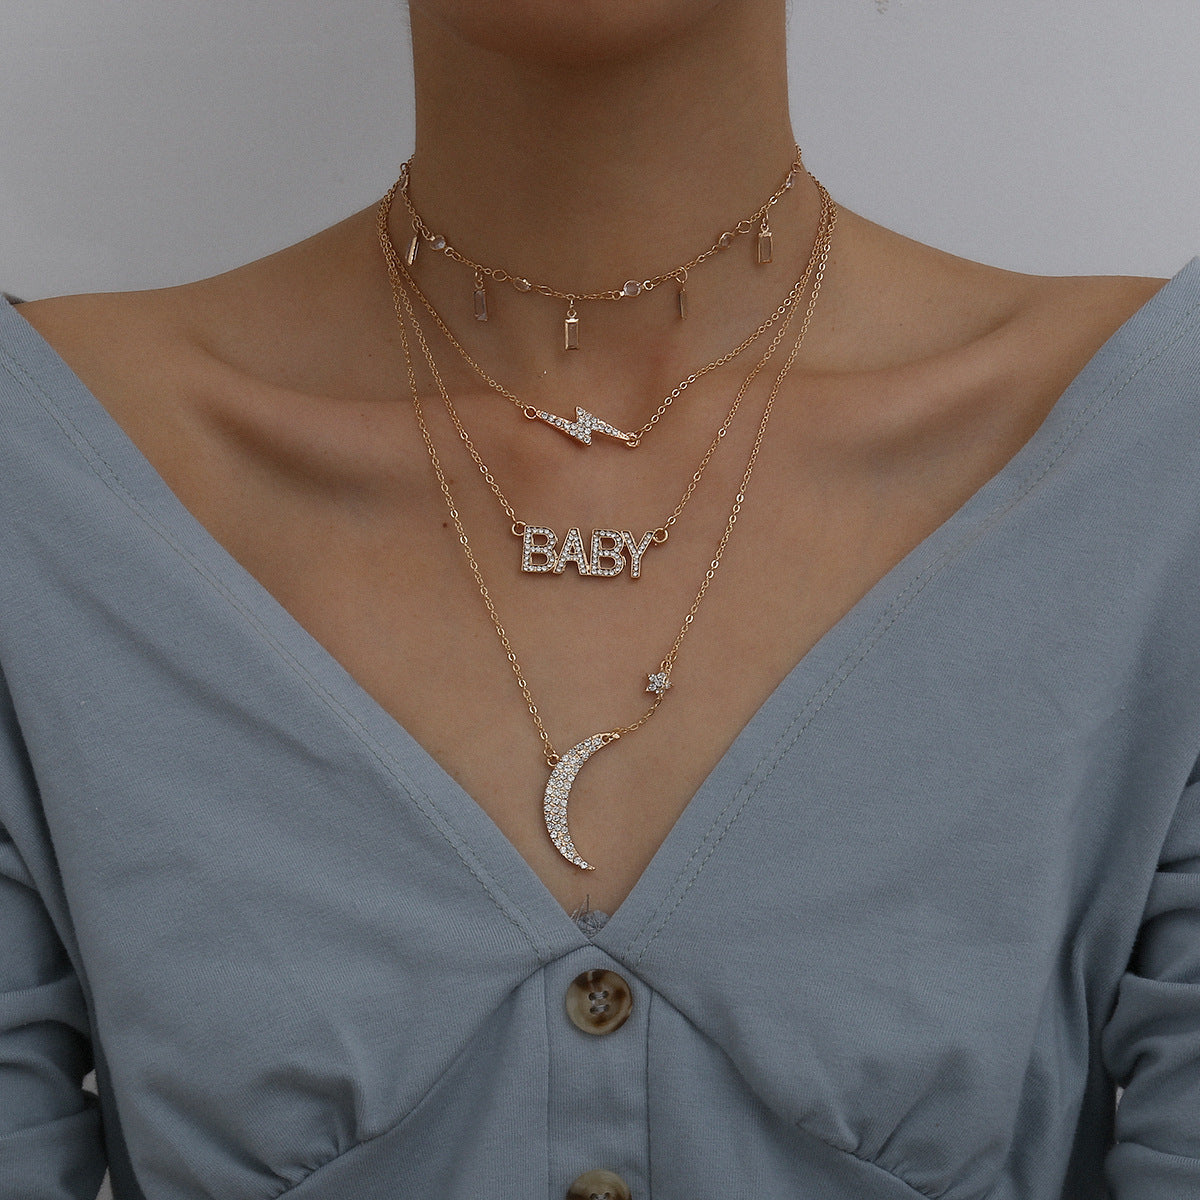 Cubic Zirconia & Crystal 18K Gold-Plated 'Baby' Layered Necklace